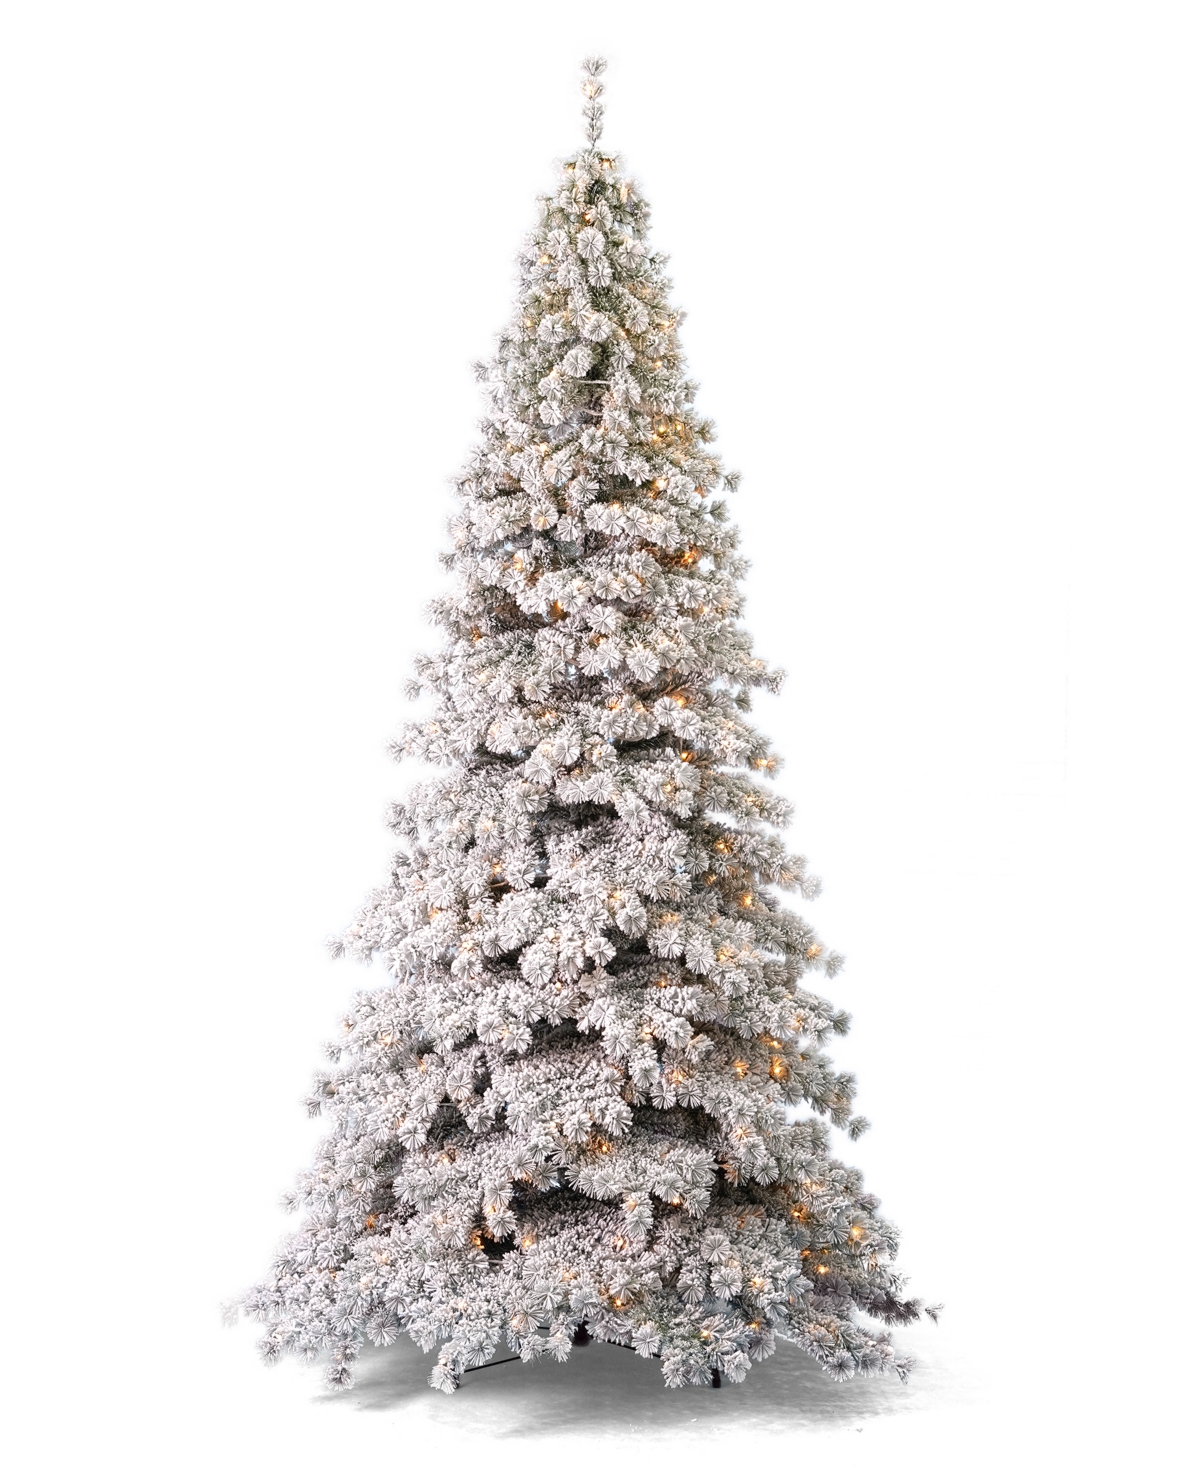 Flocked Winter Fir 10' Pre-Lit Flocked Hard Needle Tree with Metal Stand 1471 Tips, 450 Warm Led, Remote, Ez-Connect, Storage Bag - White